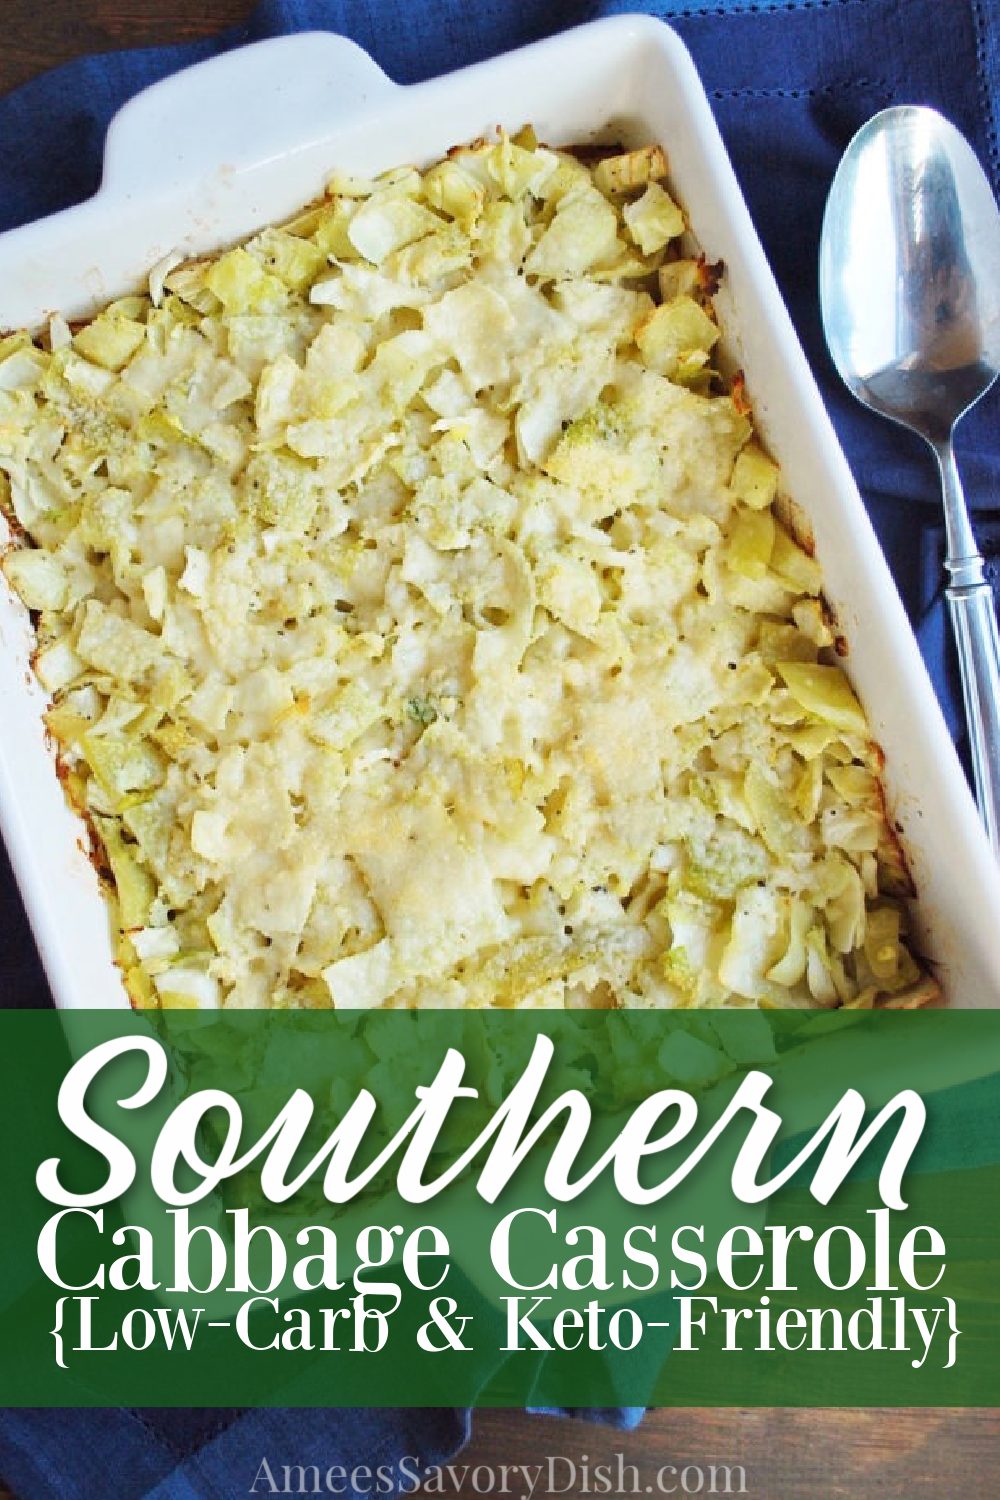 Cabbage Casserole is a vintage recipe made with fresh cabbage, eggs, butter, and cream.  The recipe originated from my great grandmother's cookbook published in the 1800s. #ketocasserole #ketosidedish #ketorecipe via @Ameessavorydish